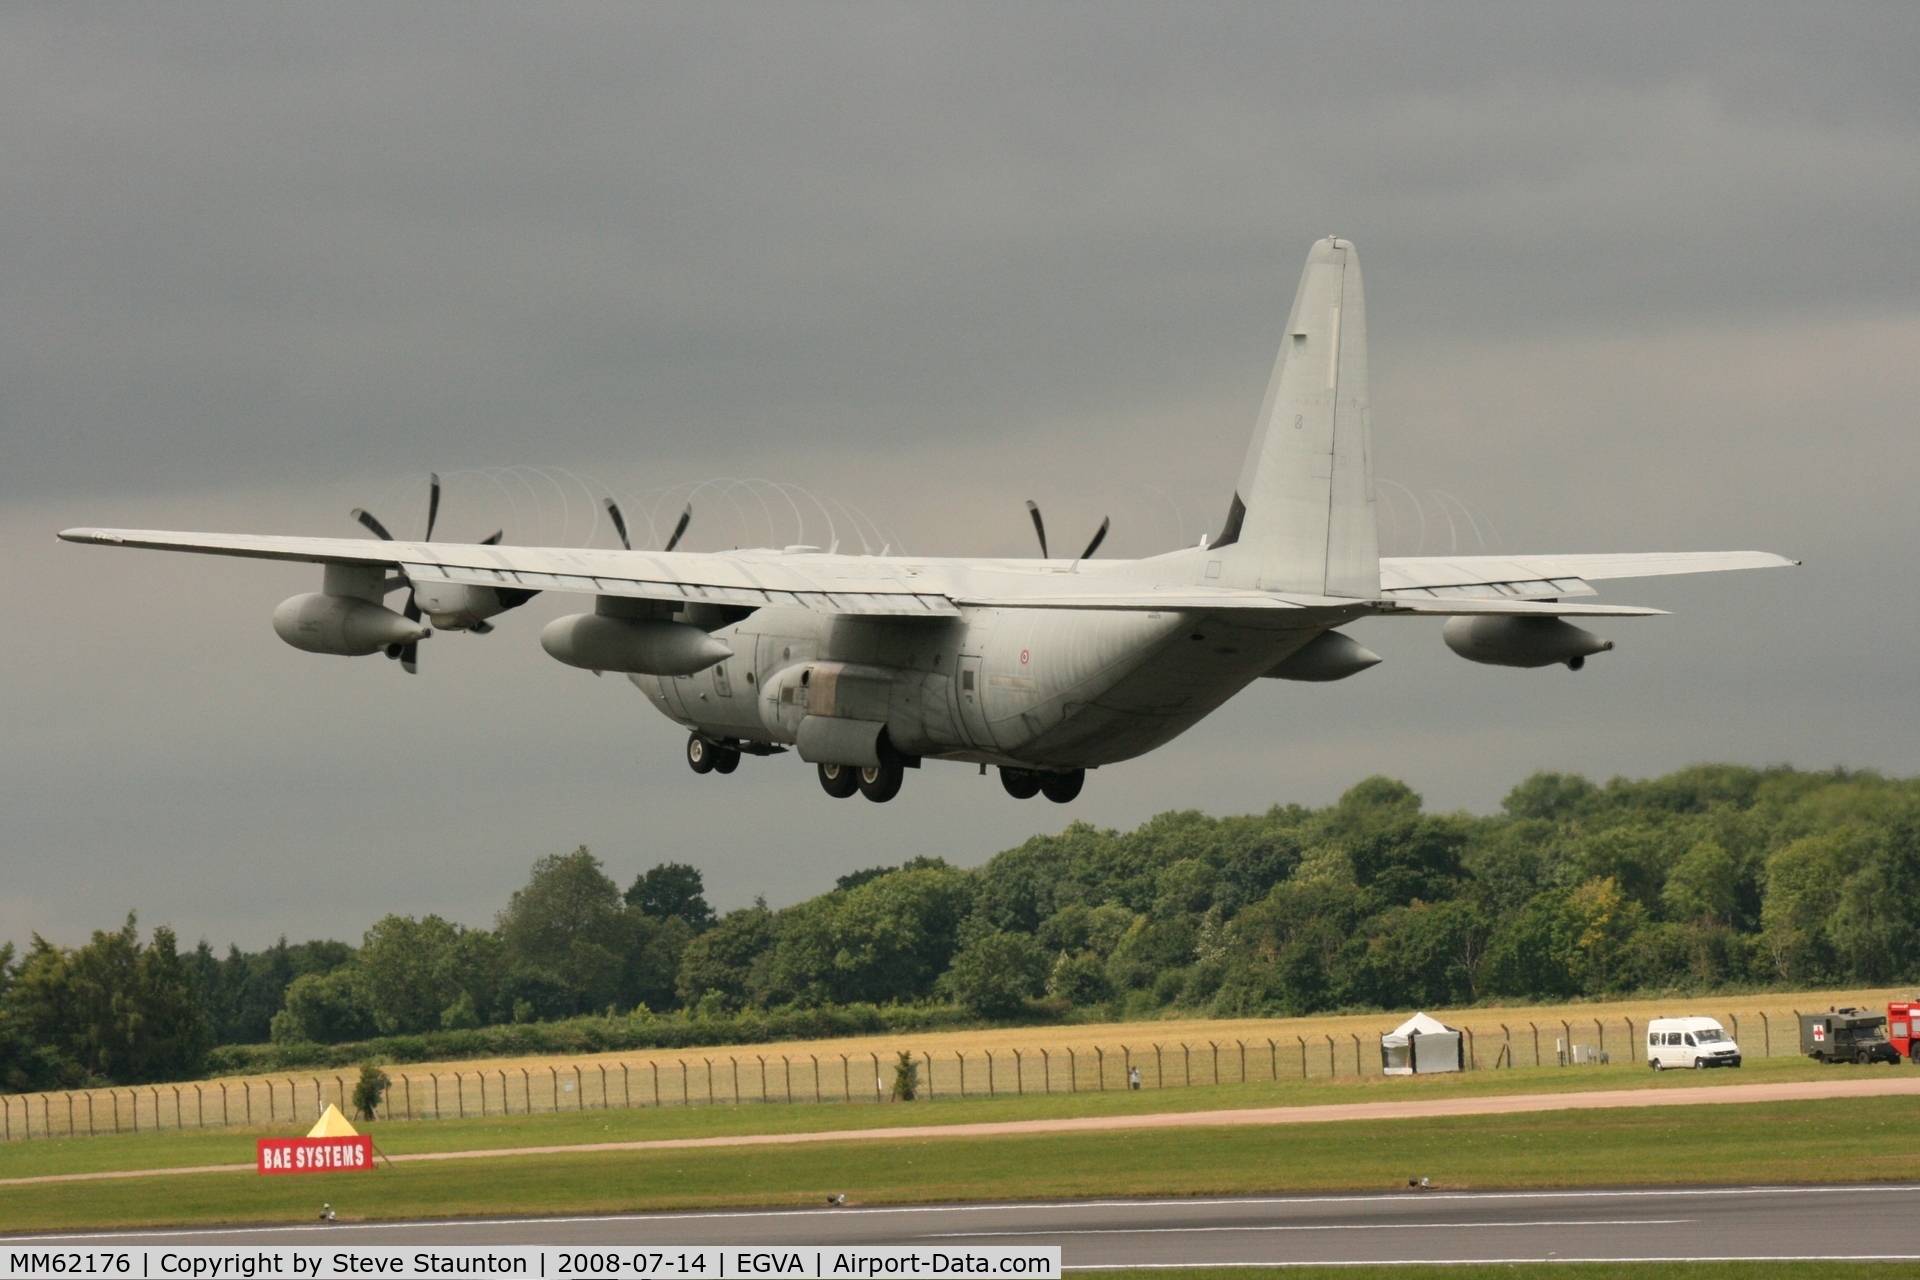 MM62176, Lockheed Martin KC-130J Hercules C/N 382-5497, Taken at the Royal International Air Tattoo 2008 during arrivals and departures (show days cancelled due to bad weather)